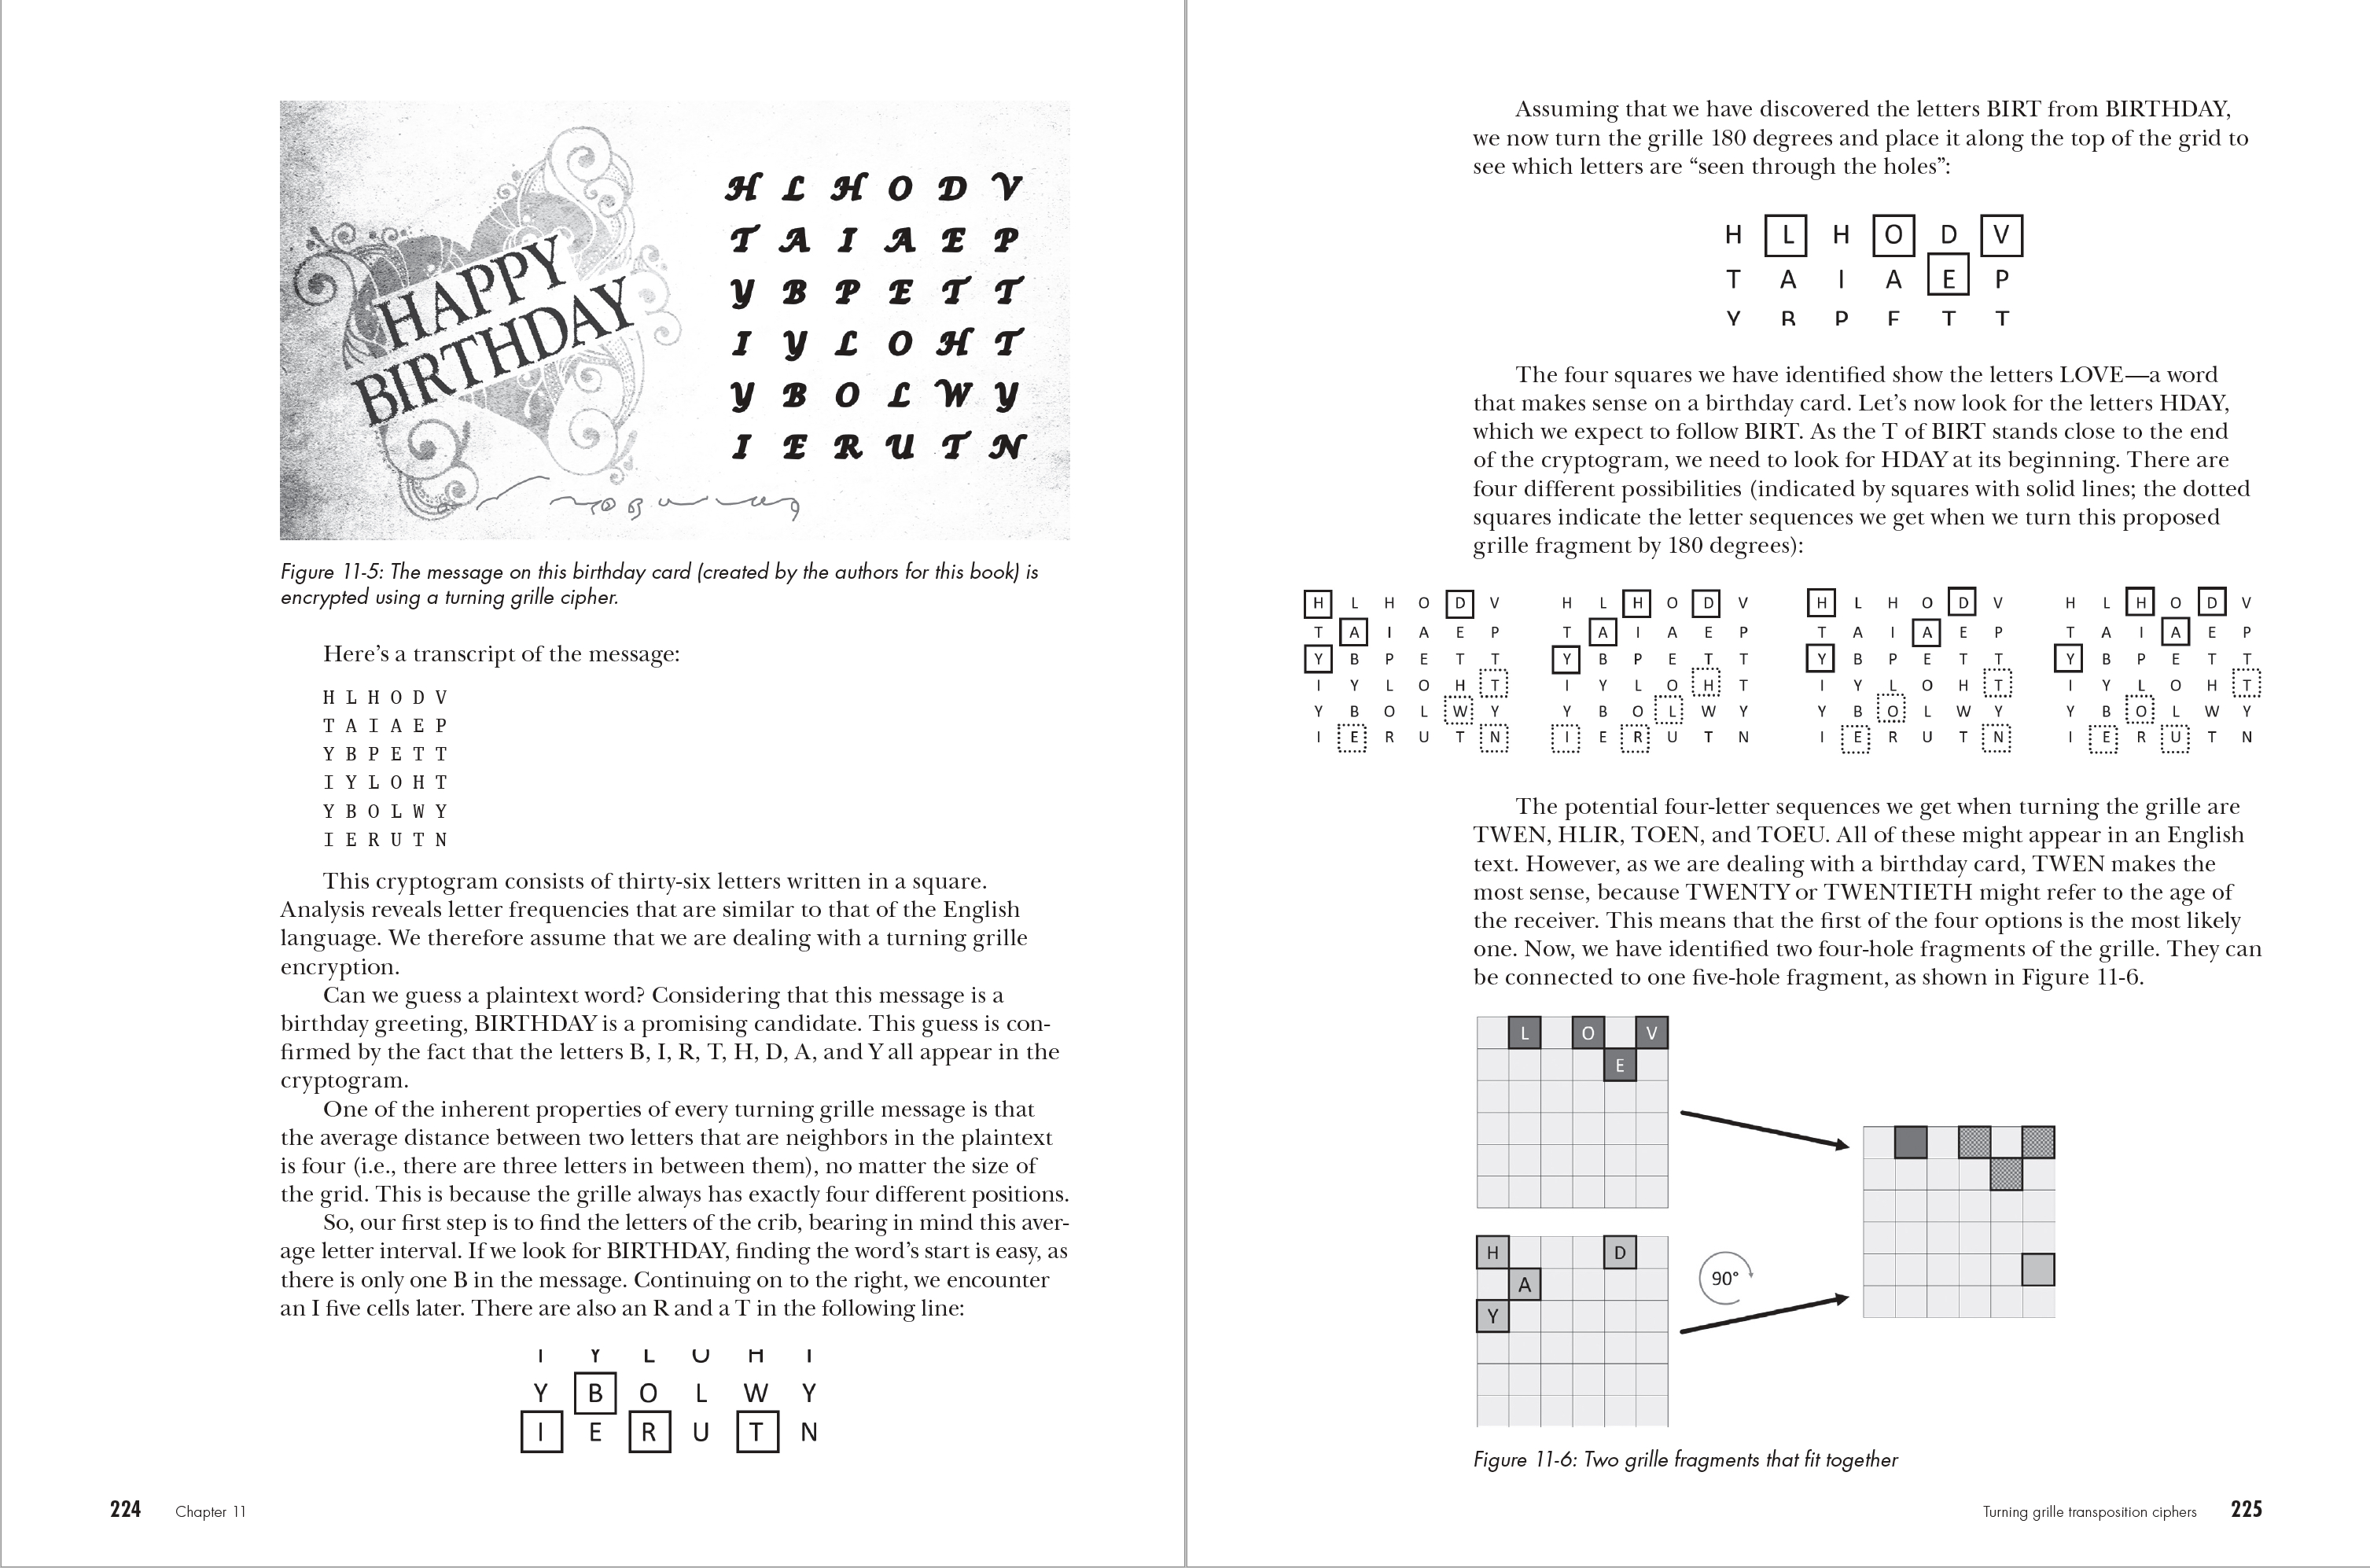 Codebreaking pages 224-225